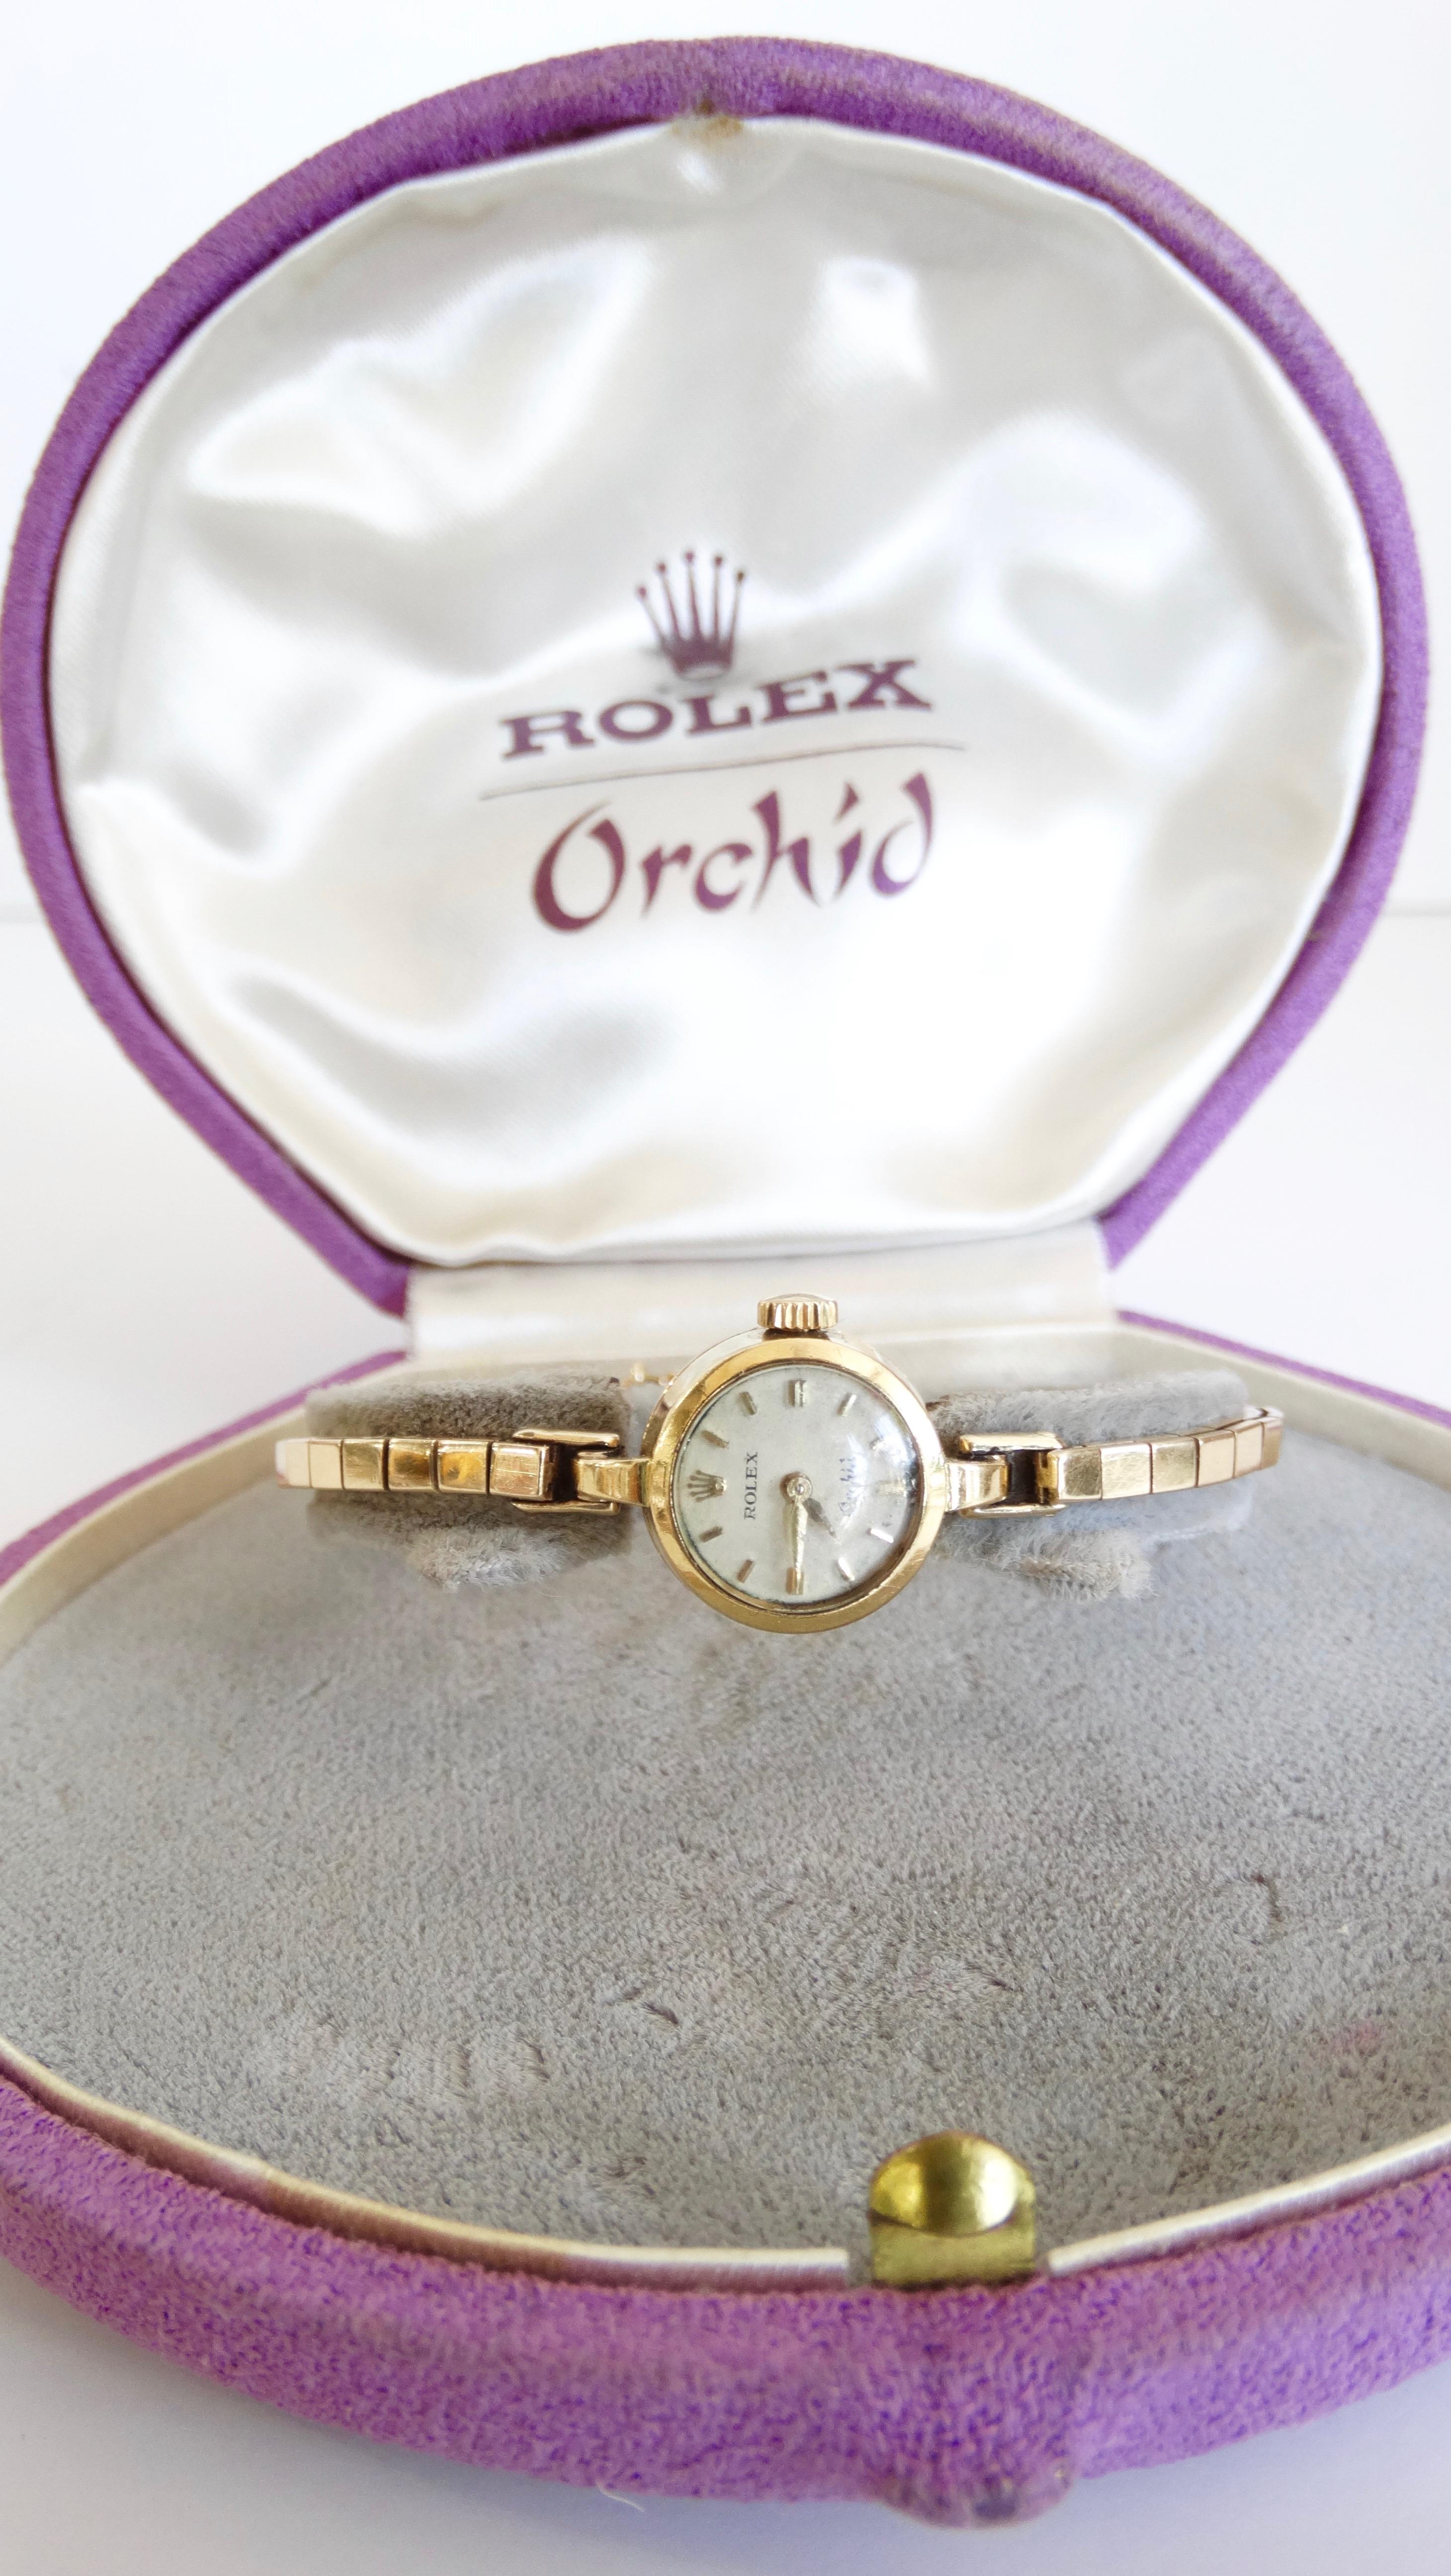 1940s 14kt Gold Rolex Orchid Watch  3